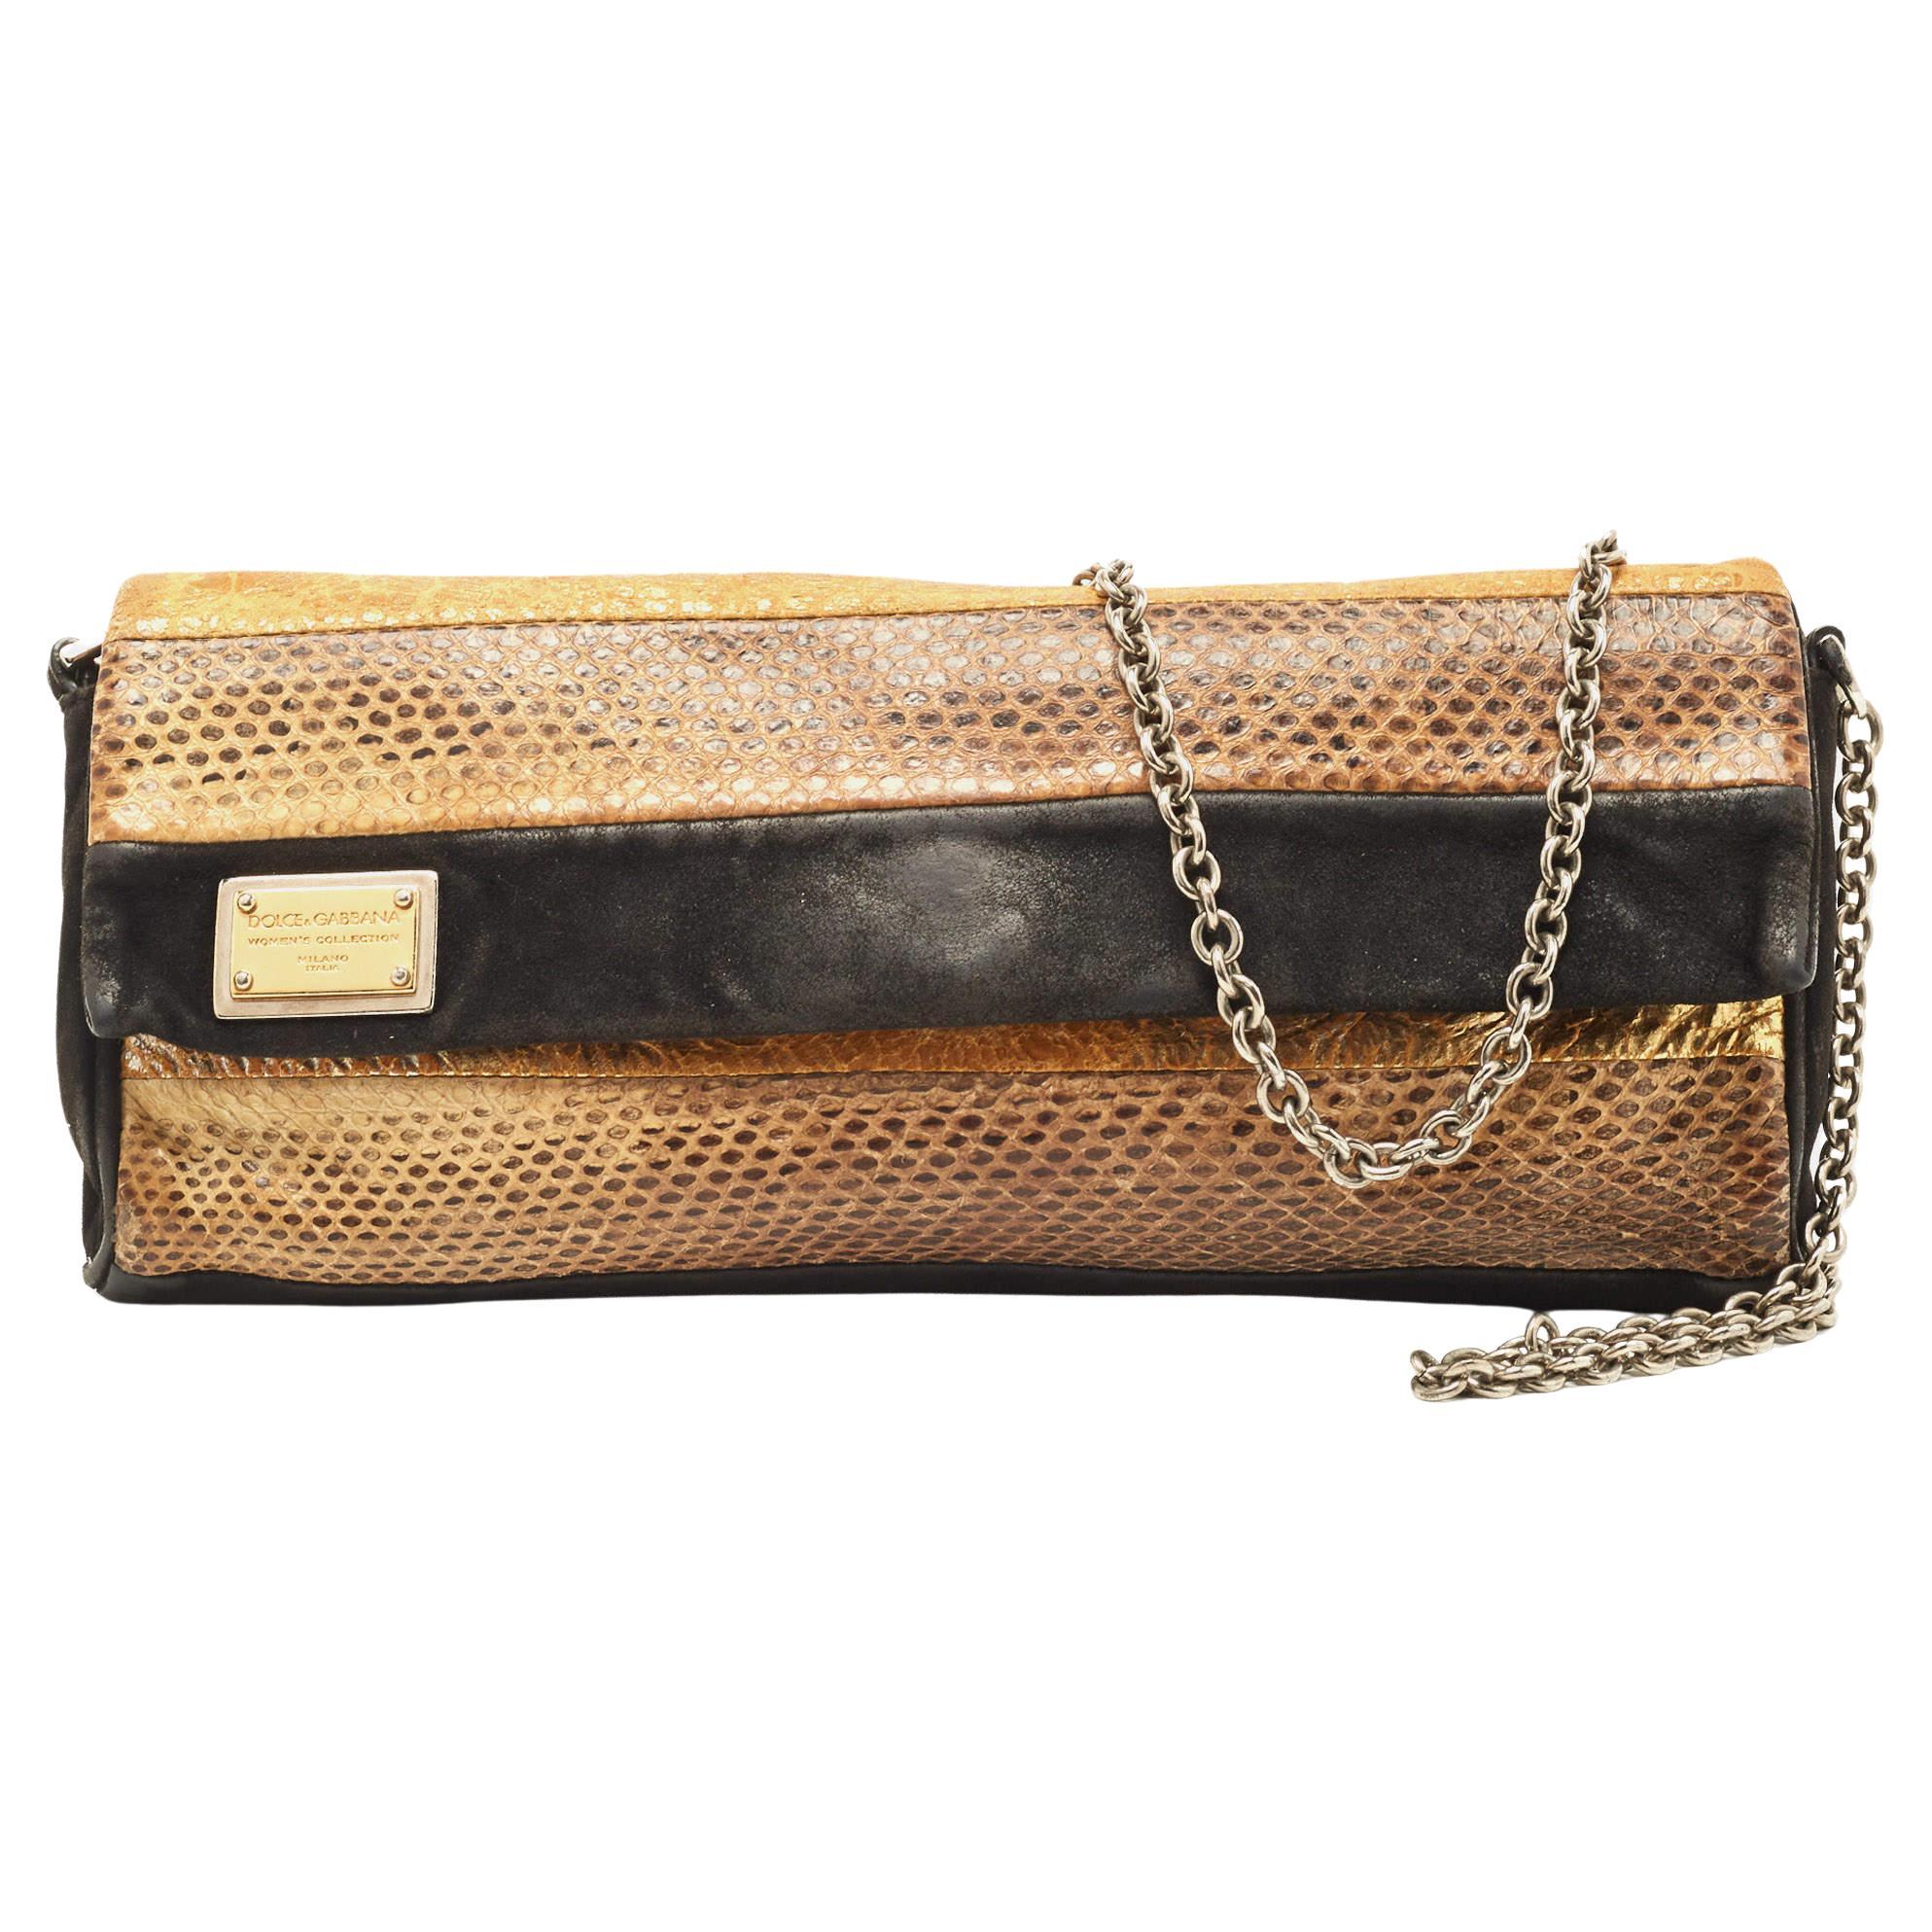 Dolce & Gabbana Black/Brown Suede And Snakeskin Leather Chain Clutch For Sale